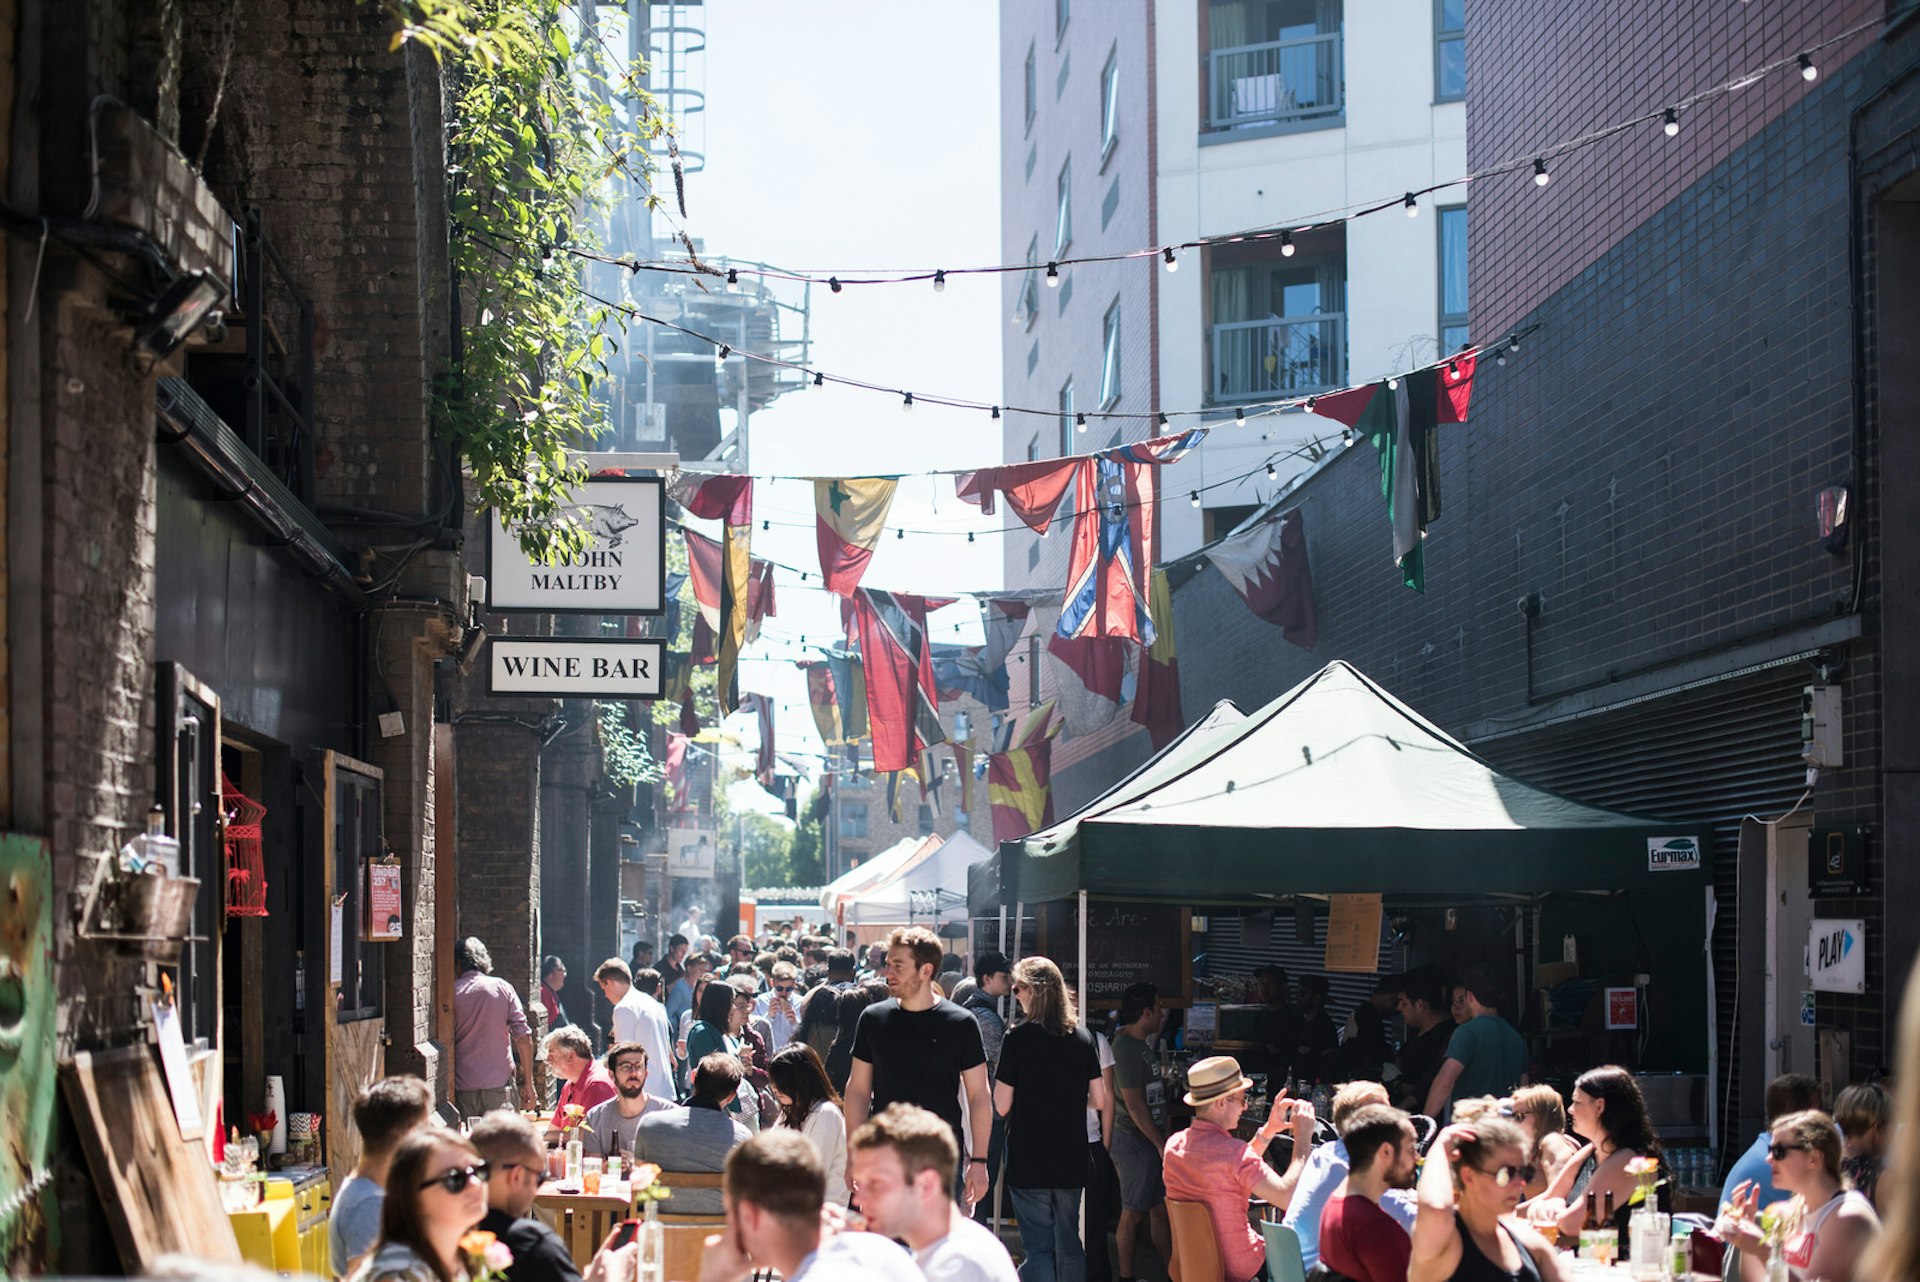 Food stalls and crowds of people at Maltby Street Market